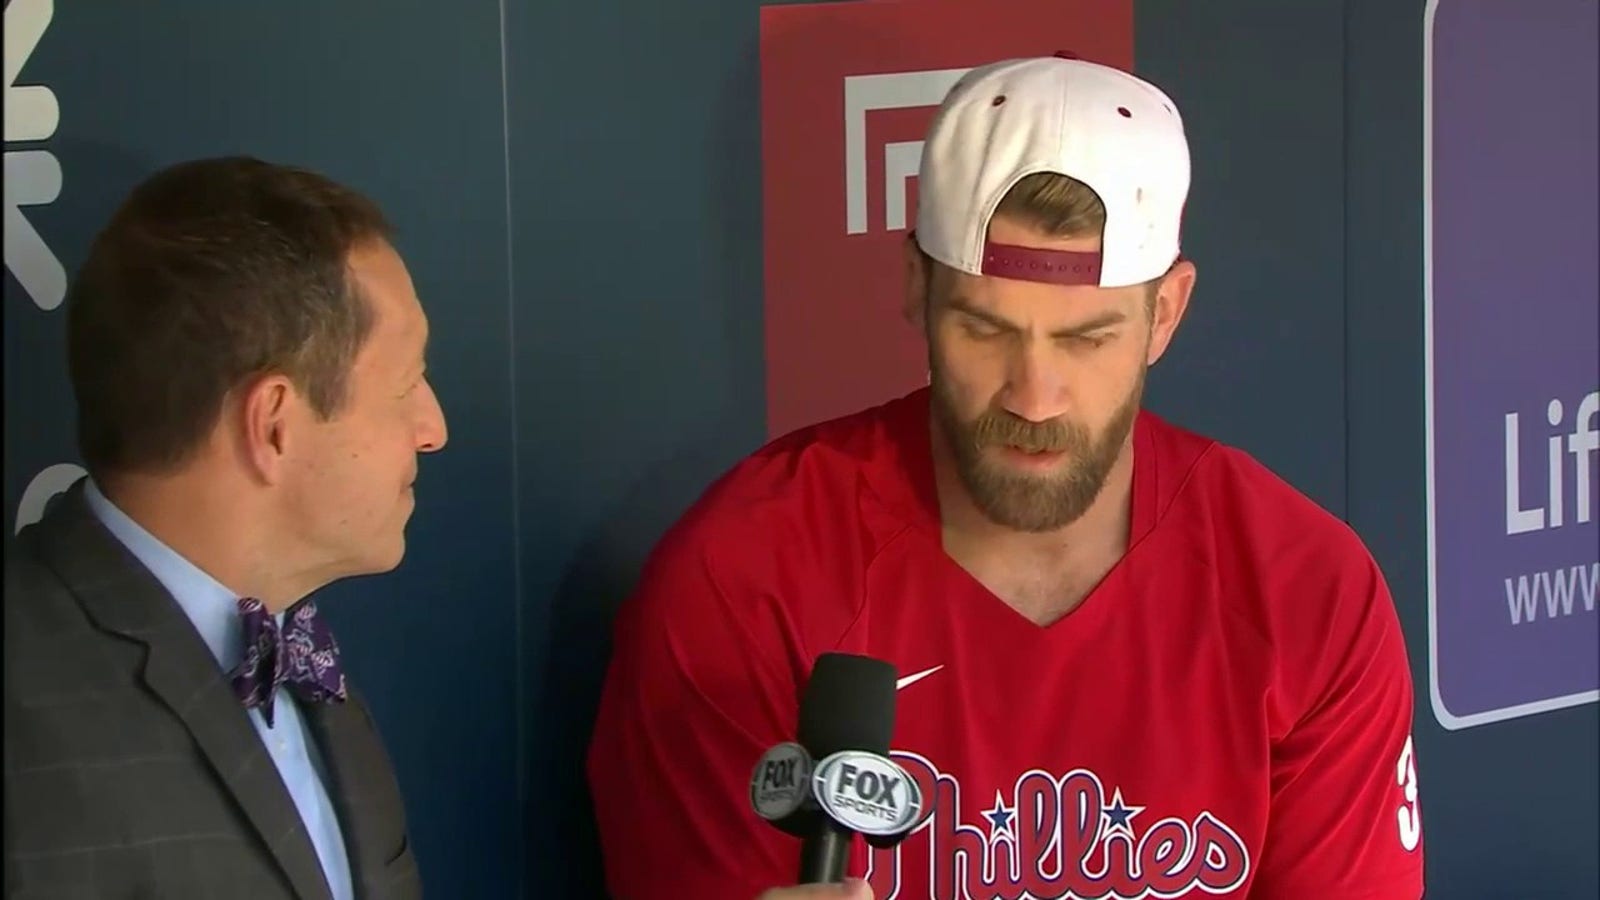 'The goal is to get back out there'— Bryce Harper opens up about his return to the Phillies after his Tommy John surgery